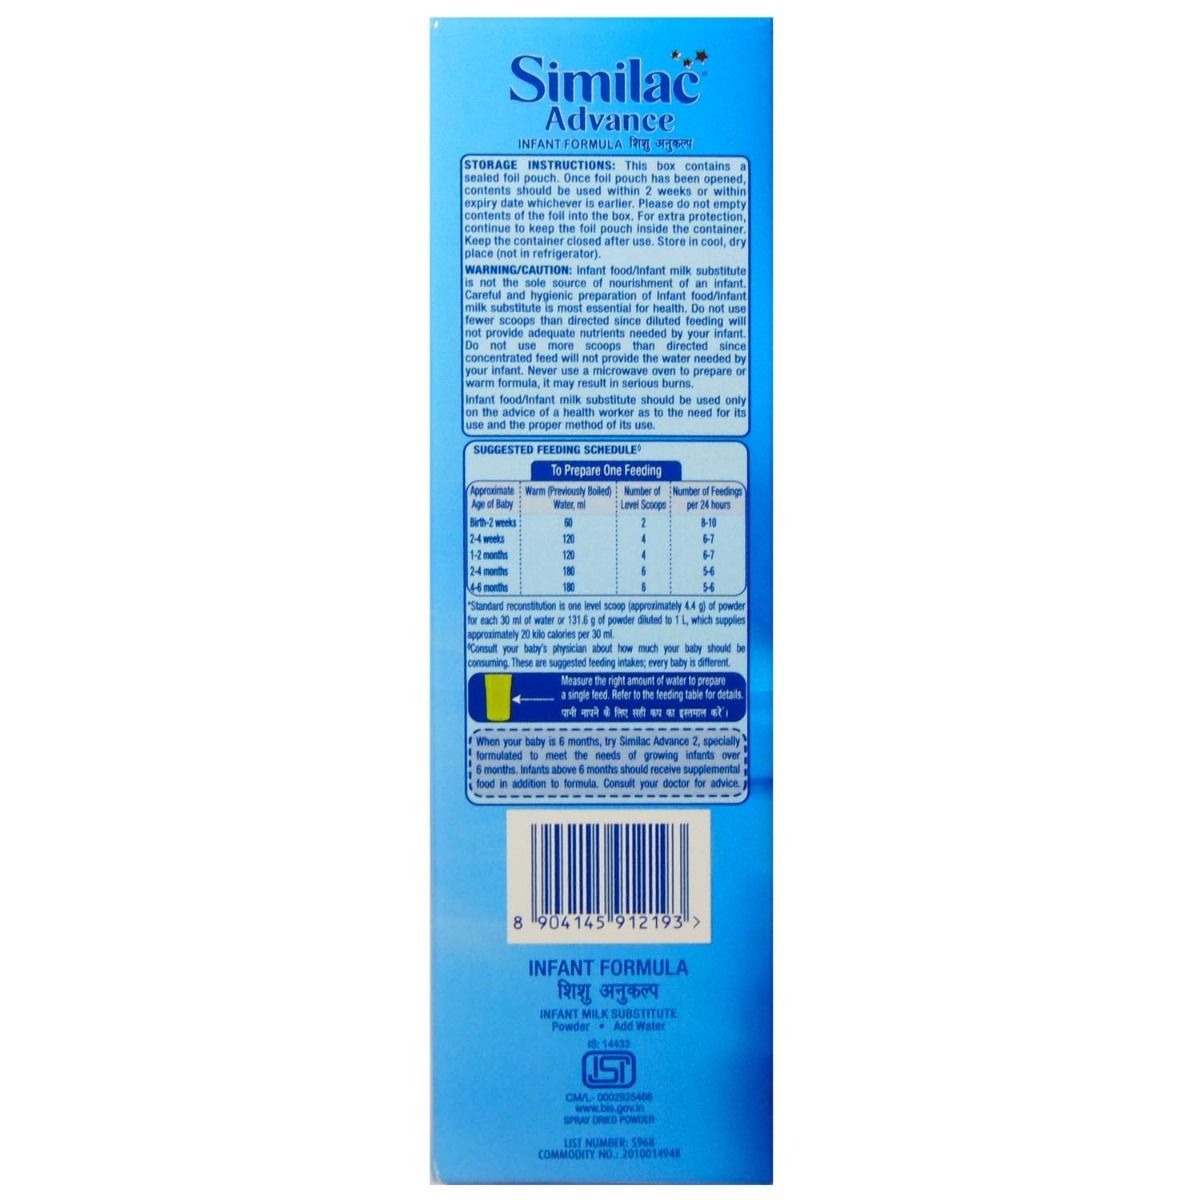 Similac Advance Infant Formula Stage 1 Powder (Up to 6 Months), 400 gm Refill Pack, Pack of 1 